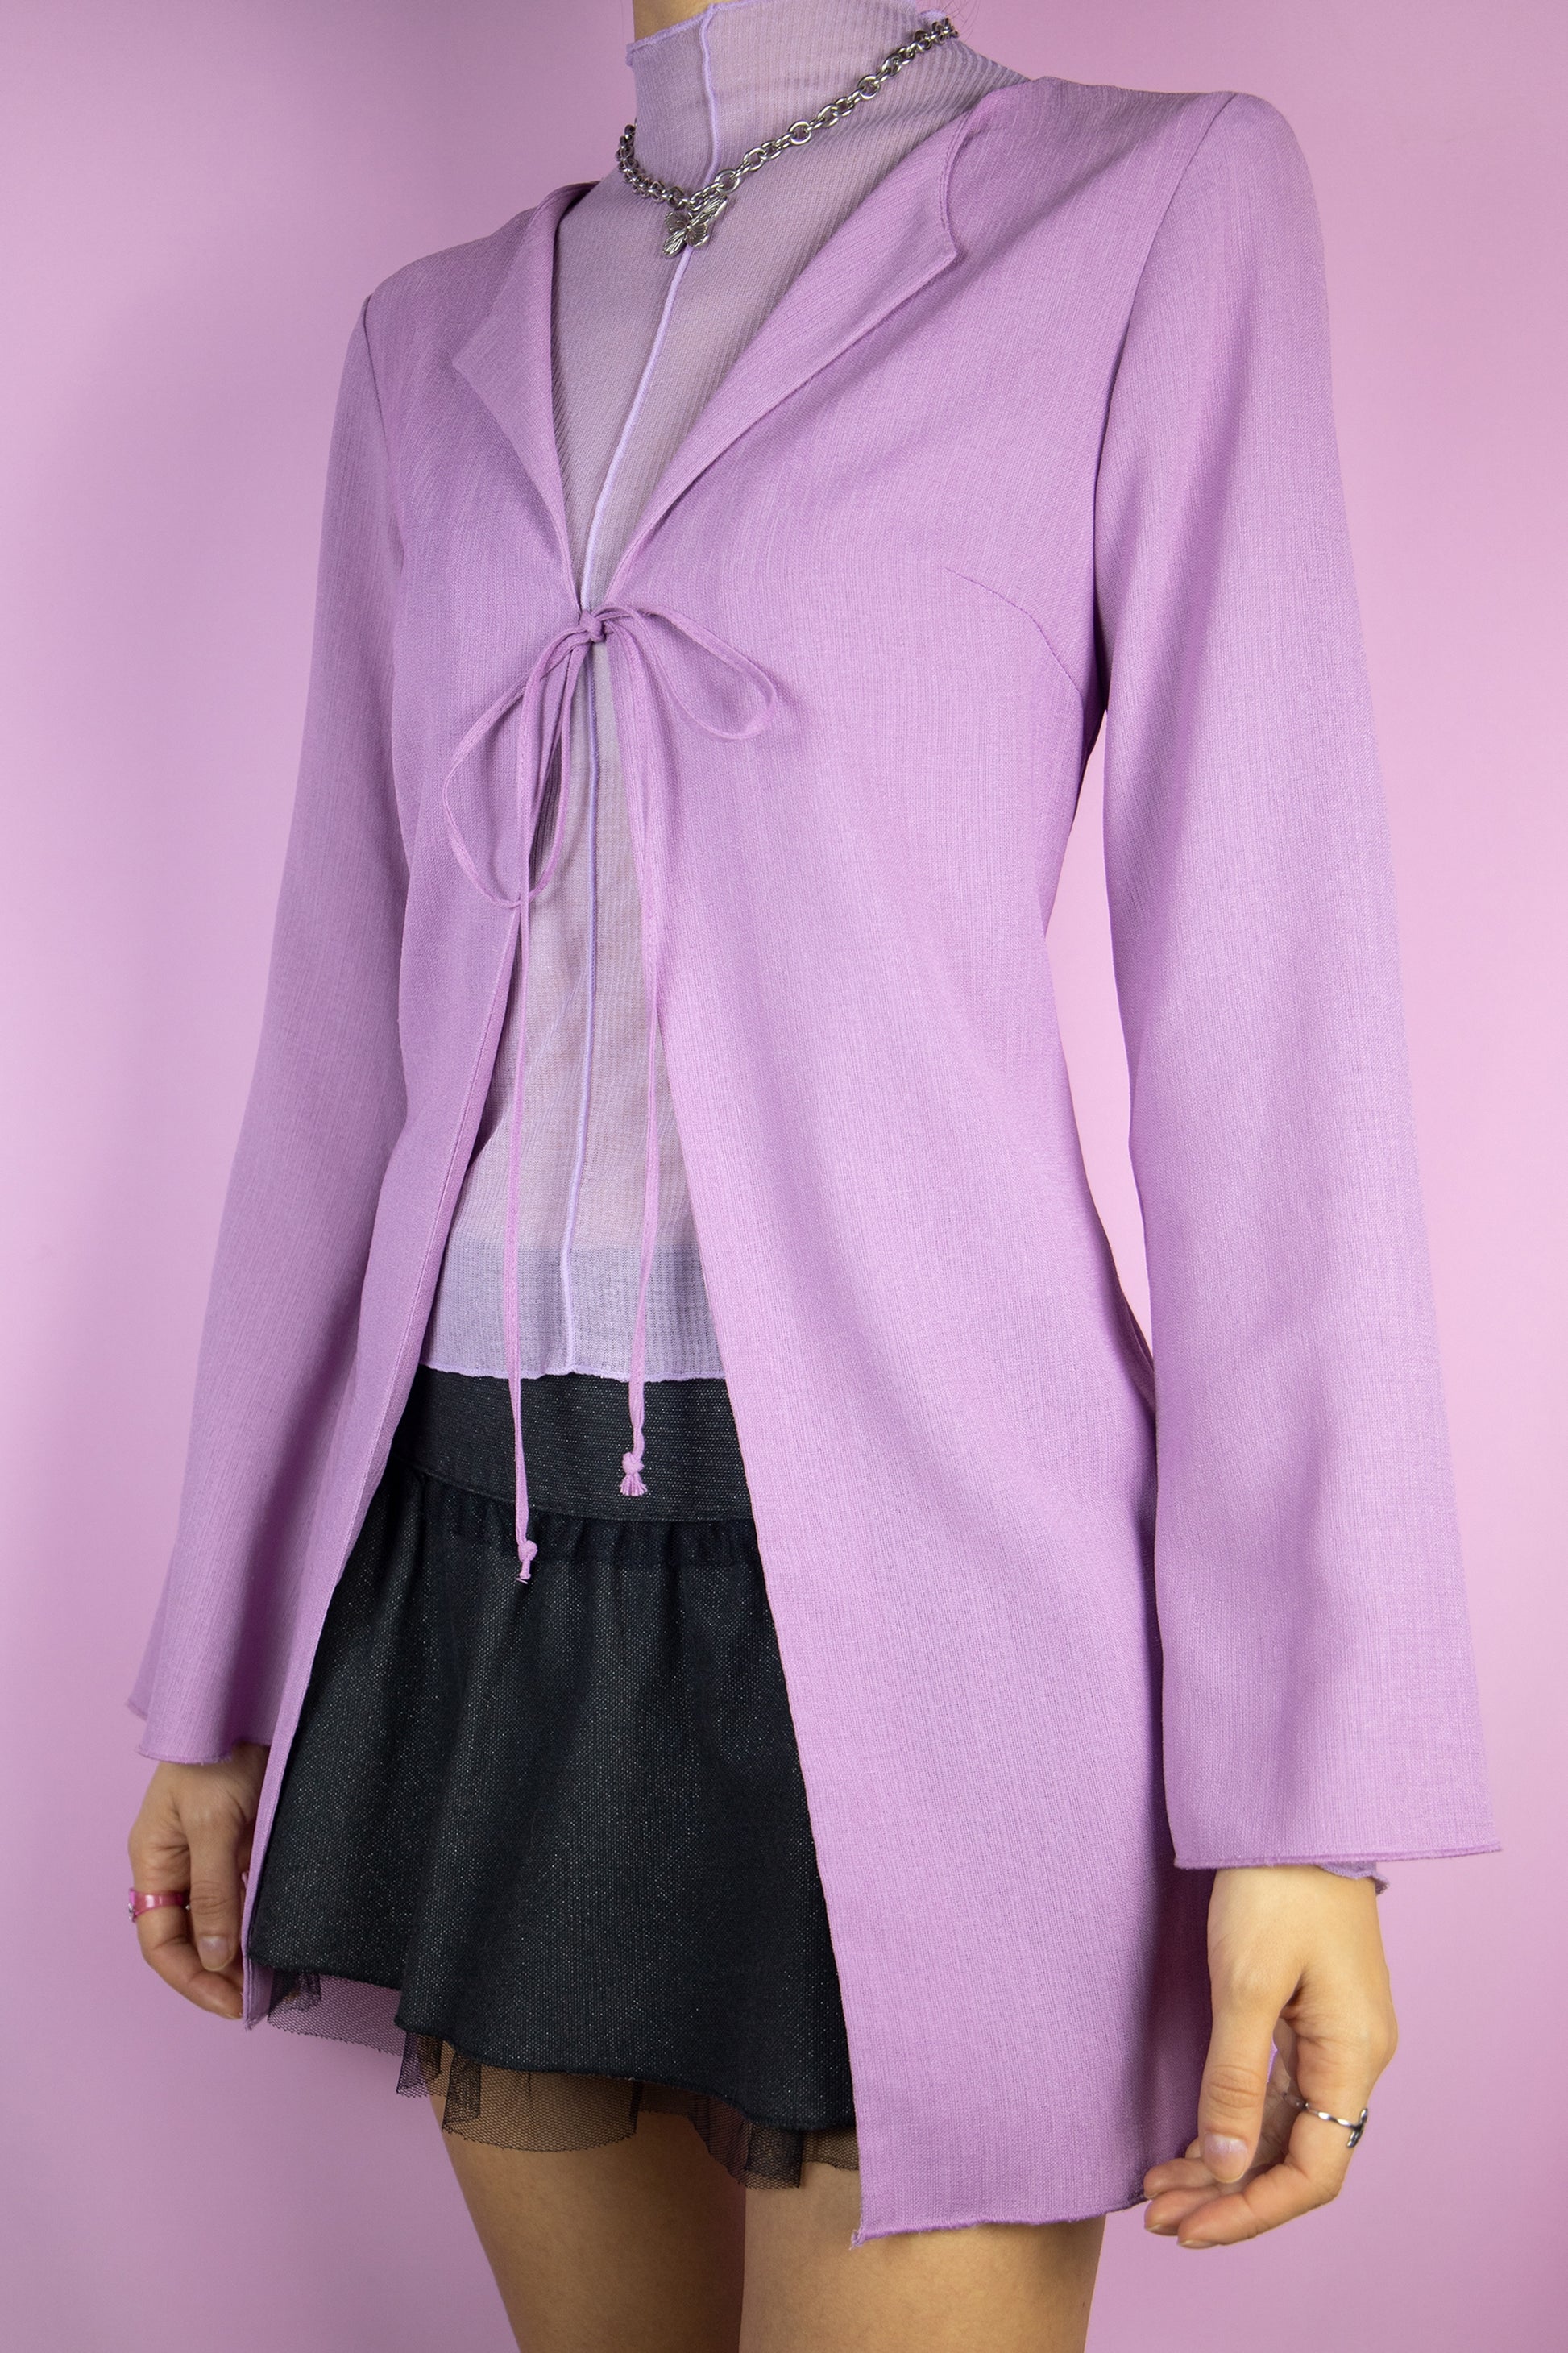 The Y2K Purple Duster Jacket is a vintage lilac top that ties at the front and has bell sleeves. Boho romantic 2000s bolero jacket.